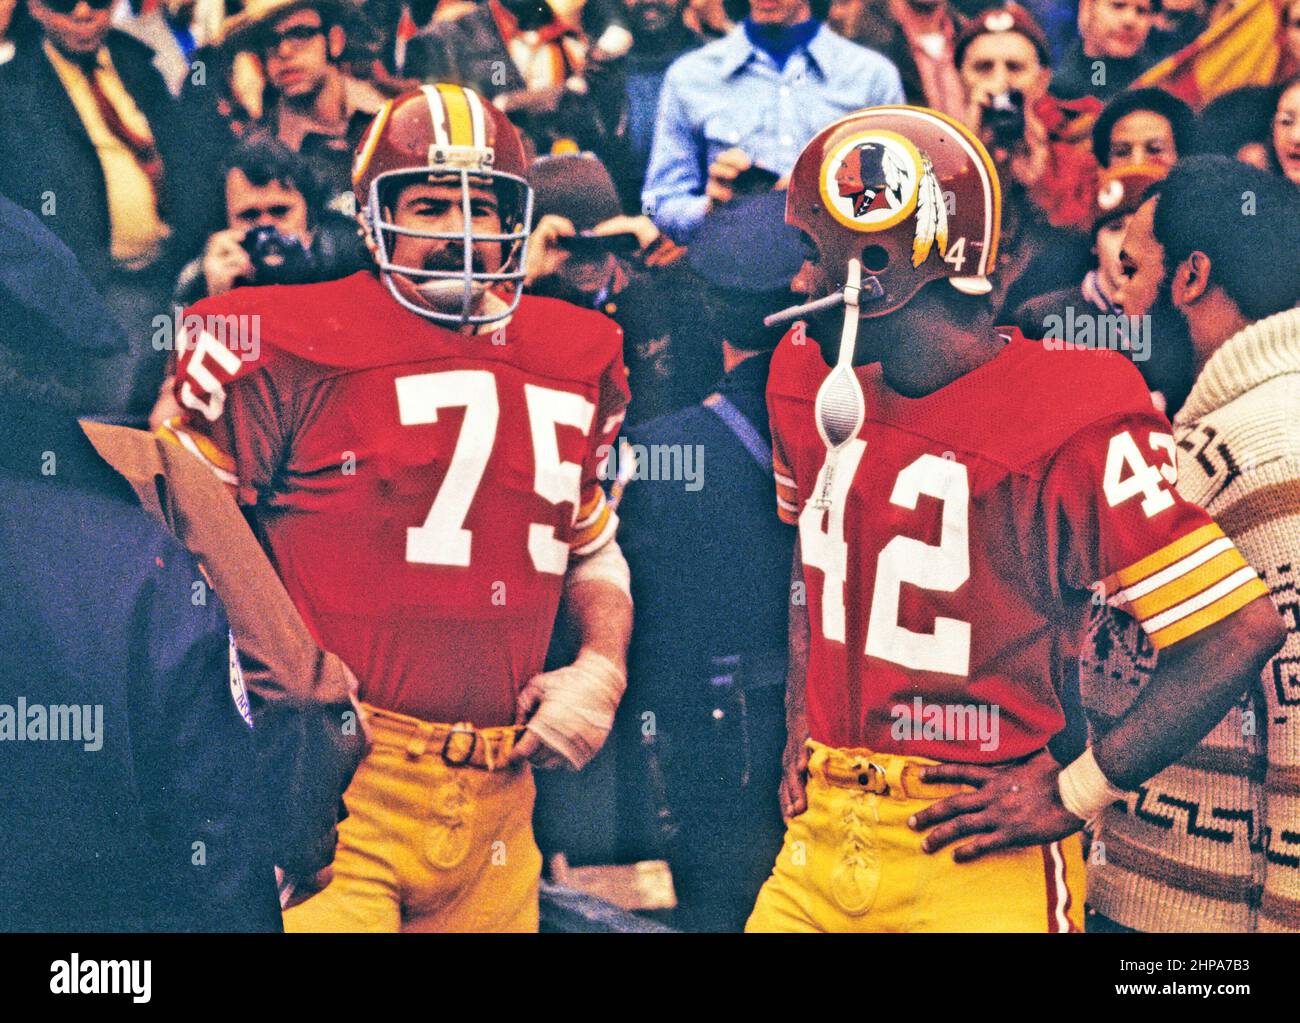 Washington Redskins offensive tackle Terry Hermeling (75) and wide receiver Charley Taylor (42) wait to be introduced with their teammates prior to the NFC Championship game against the Dallas Cowboys at RFK Stadium in Washington, DC on December 31, 1972. The Redskins won the game and the right to play in Super Bowl VII by a score of 26 - 3. Credit: Arnie Sachs/CNP Stock Photo